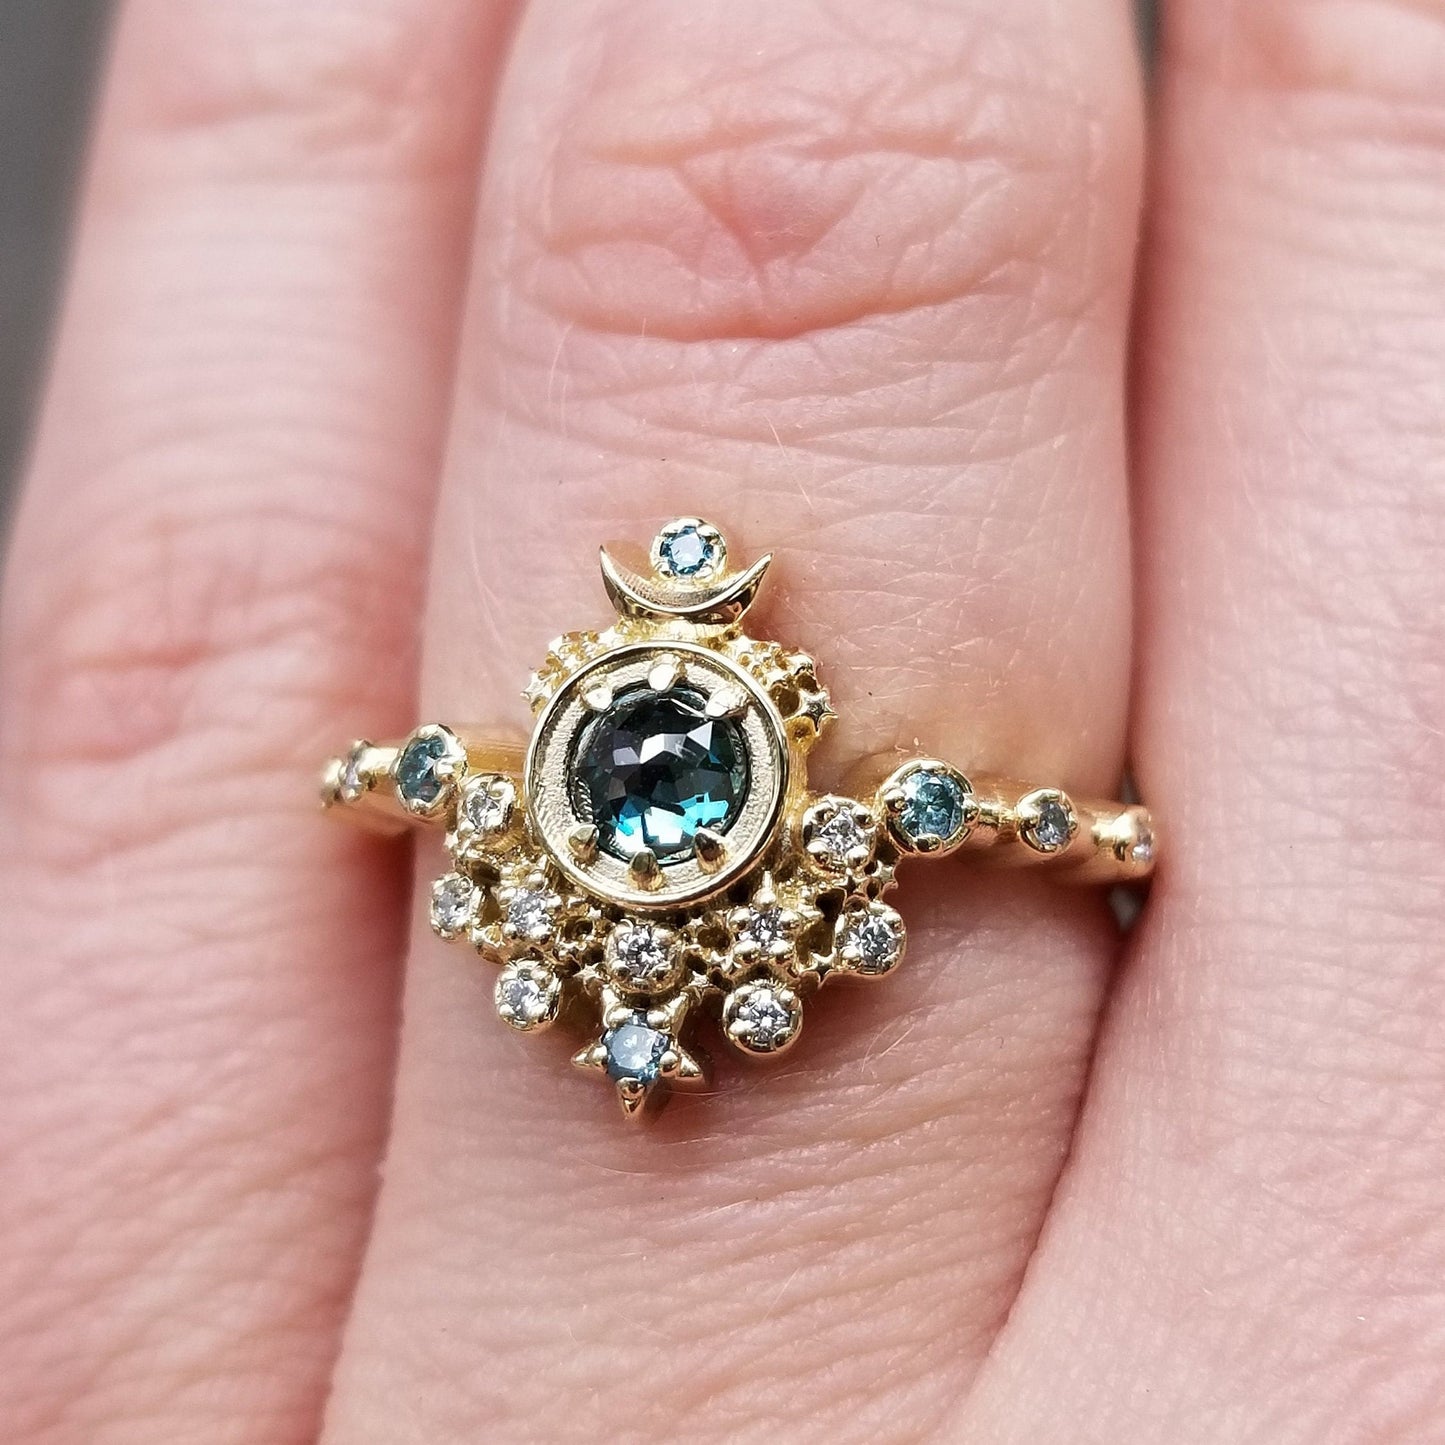 Ready to Ship Size 6 - 8 - Rose Cut Blue Diamond Moon Witch Engagement Ring Set with Sunray - 14k Yellow Gold Gothic Unique Handmade Jewelry